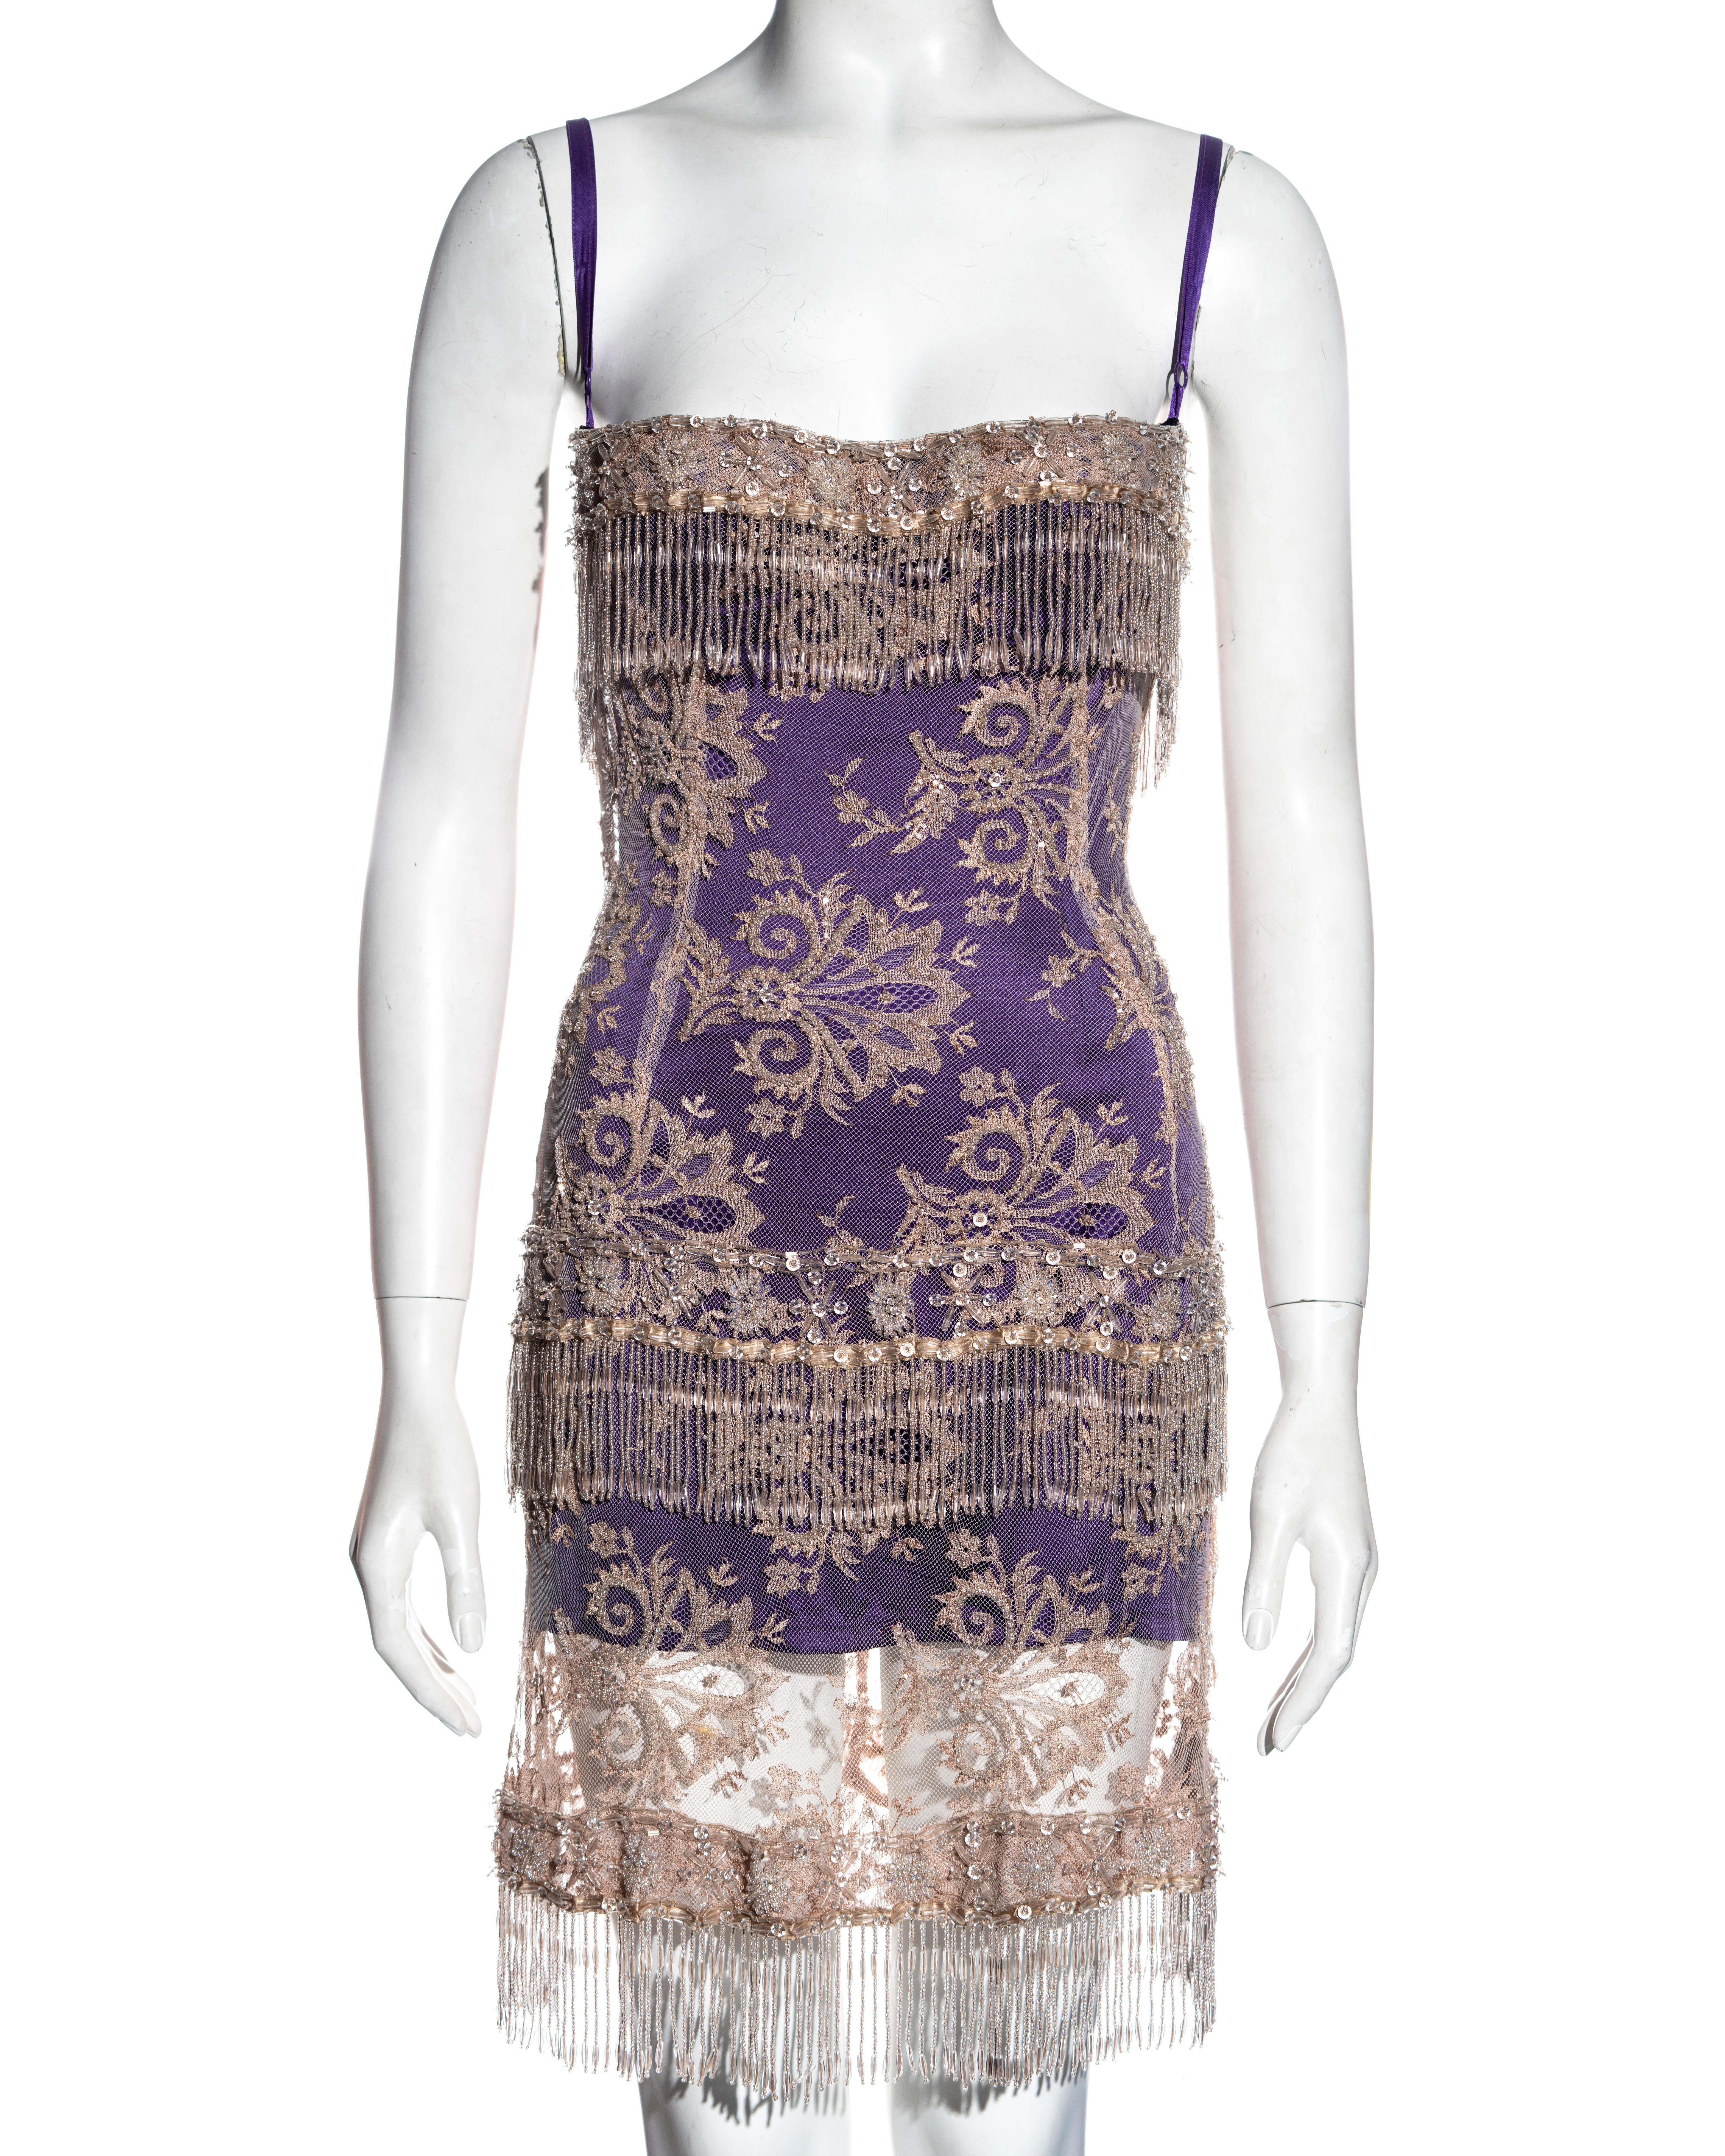 ▪ Dolce & Gabbana beaded lace mini dress 
▪ Delicate nude lace embellished with clear beads 
▪ Clear beaded tassel trim 
▪ Purple silk underdress
▪ Adjustable ribbon shoulder straps 
▪ Built-in bra
▪ IT 42 - FR 38 - UK 10 - US 6
▪ Spring-Summer